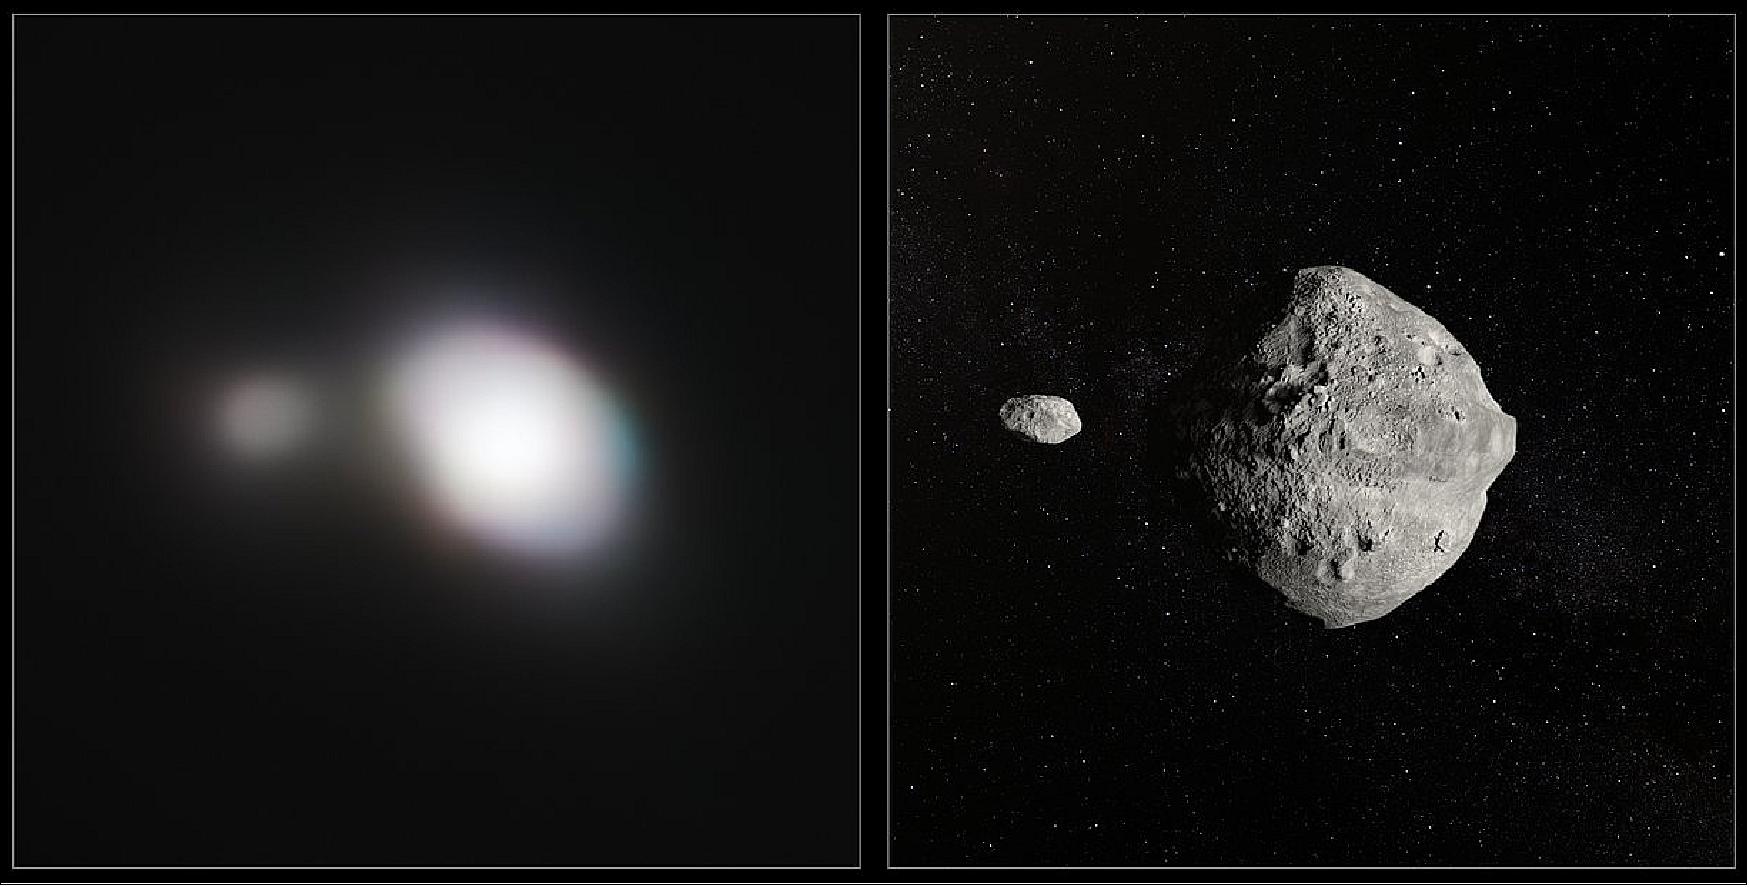 Figure 50: Side by side observation and artist's impression of Asteroid 1999 KW4